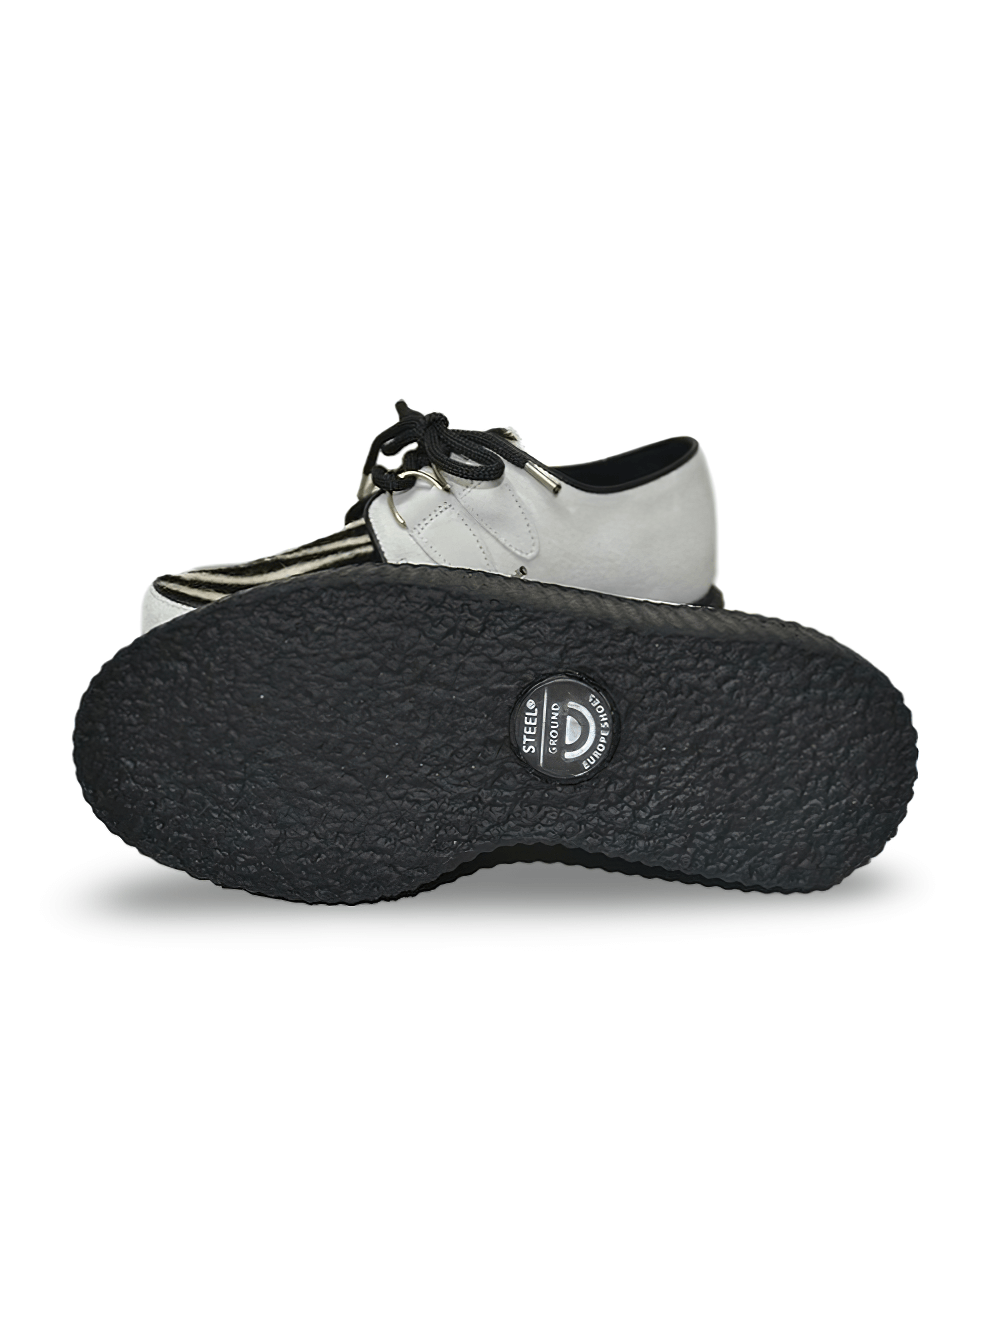 Dual-Tone Suede Creeper Shoes with Double Sole